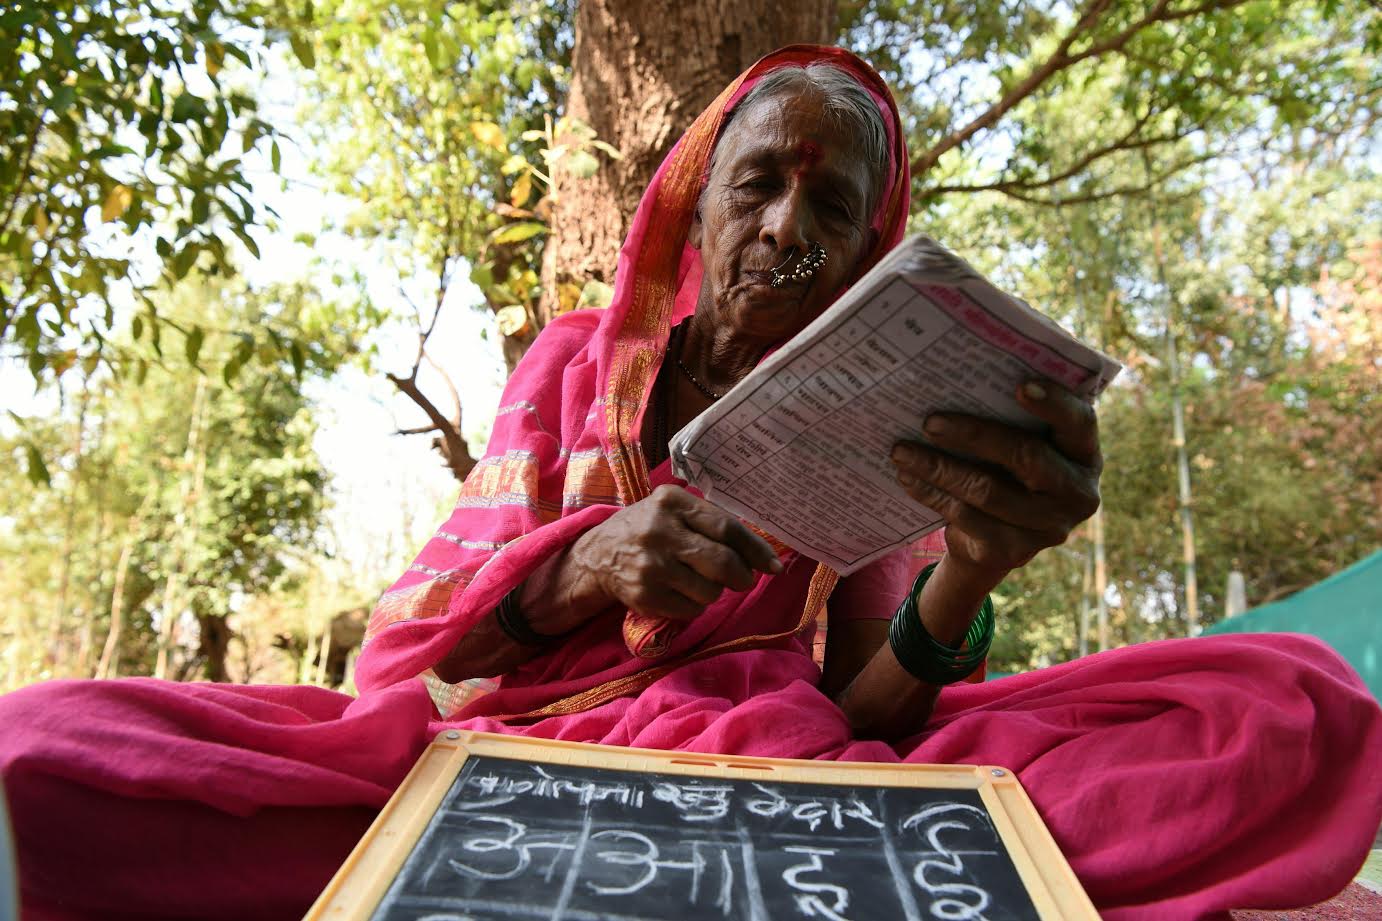 Indian grandmother Sulochona Kedar, 68, reading from a textbook during a class at Aajibaichi Shala, or &quot;school for grannies&quot; in the local Marathi language, in Phangane village in Maharashtra state's Thane district, some 125km northeast of Mumbai. (AFP)